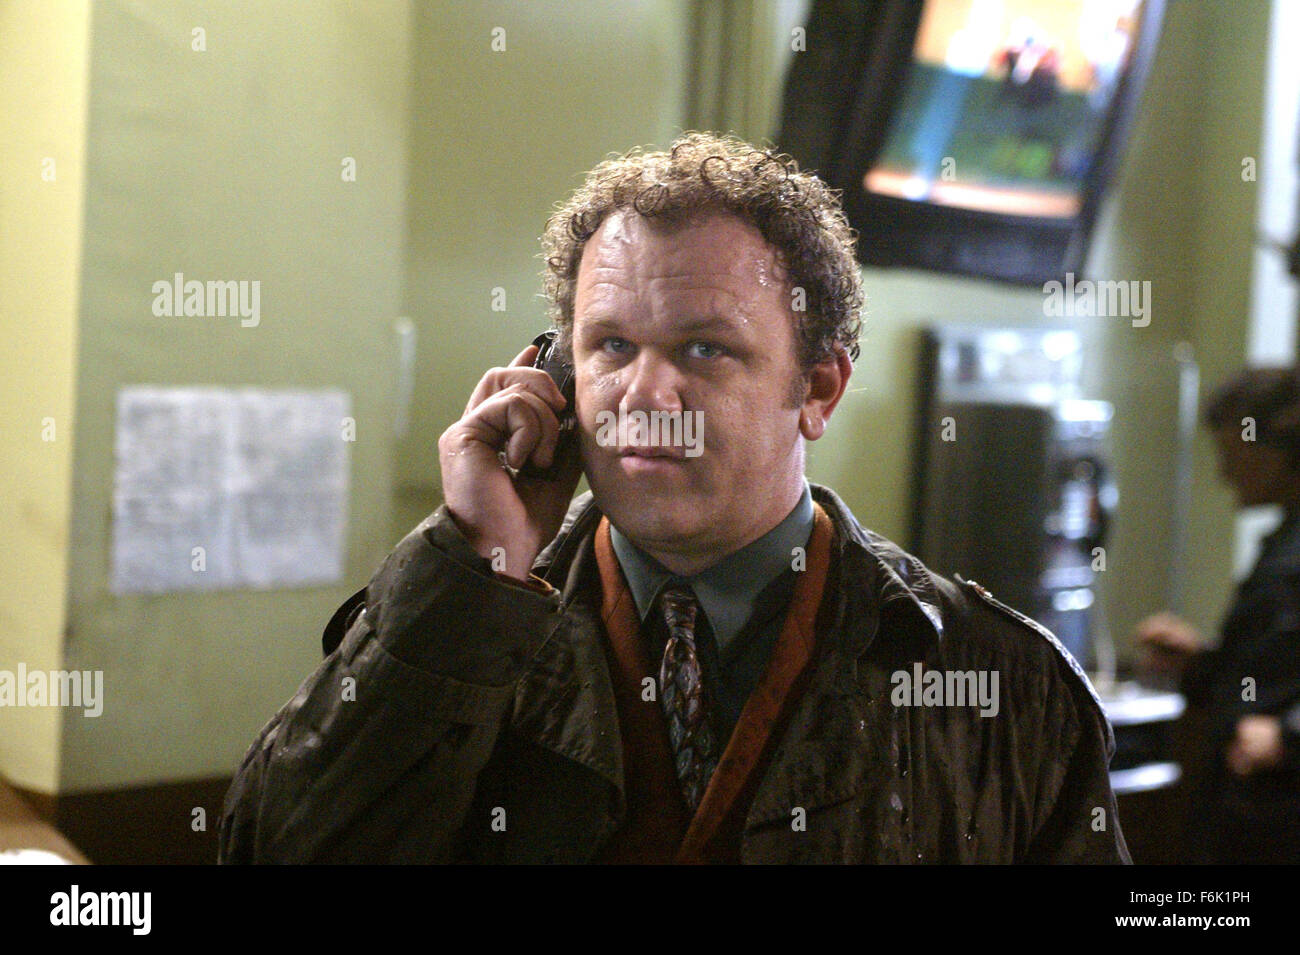 Jun 28, 2005; Hollywood, CA, USA; Actor JOHN C. REILLY in the Touchstone Pictures thriller, 'Dark Water.' Directed by Walter Salles. Set to be released July 8, 2005. Mandatory Credit: Photo by Touchstone Pictures. (Ac) Copyright 2005 by Courtesy of Touchstone Pictures Stock Photo